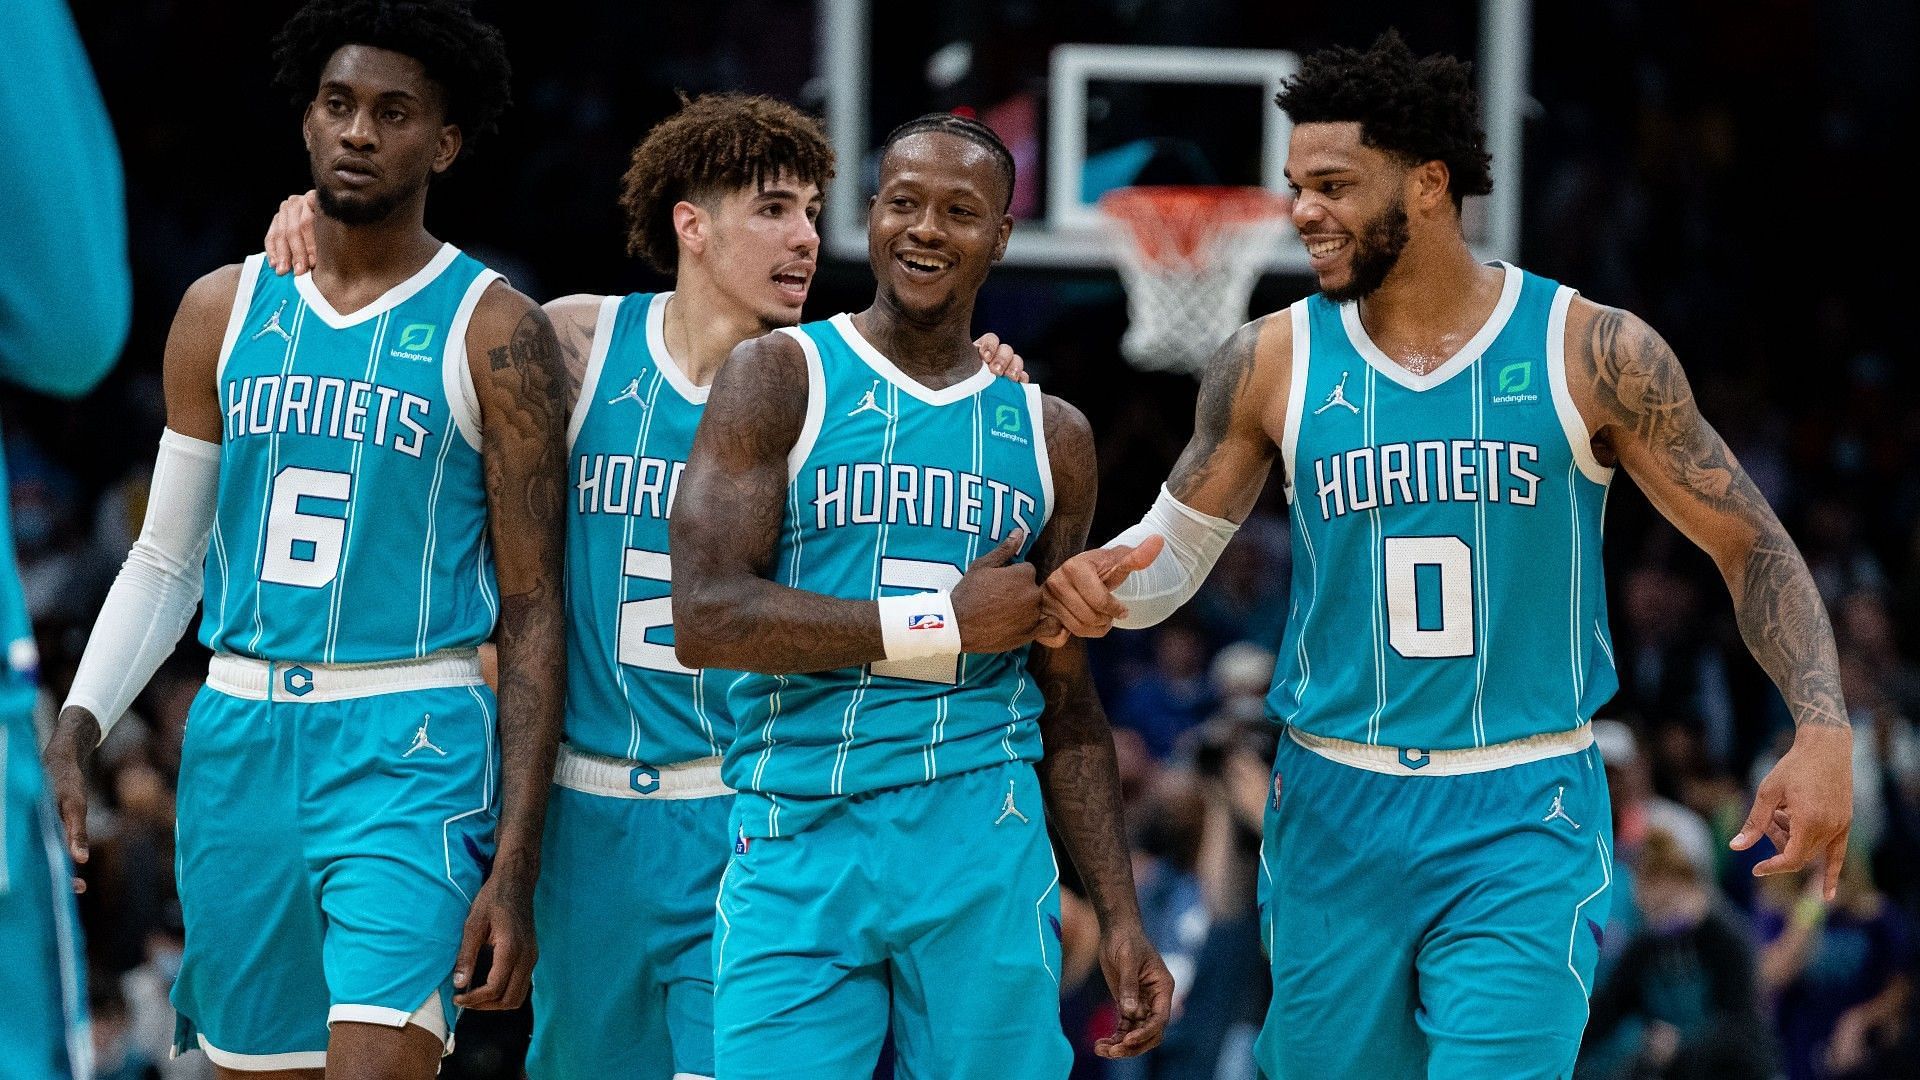 The Charlotte Hornets will not have an All-Star yet again this season [Photo: Sporting News]